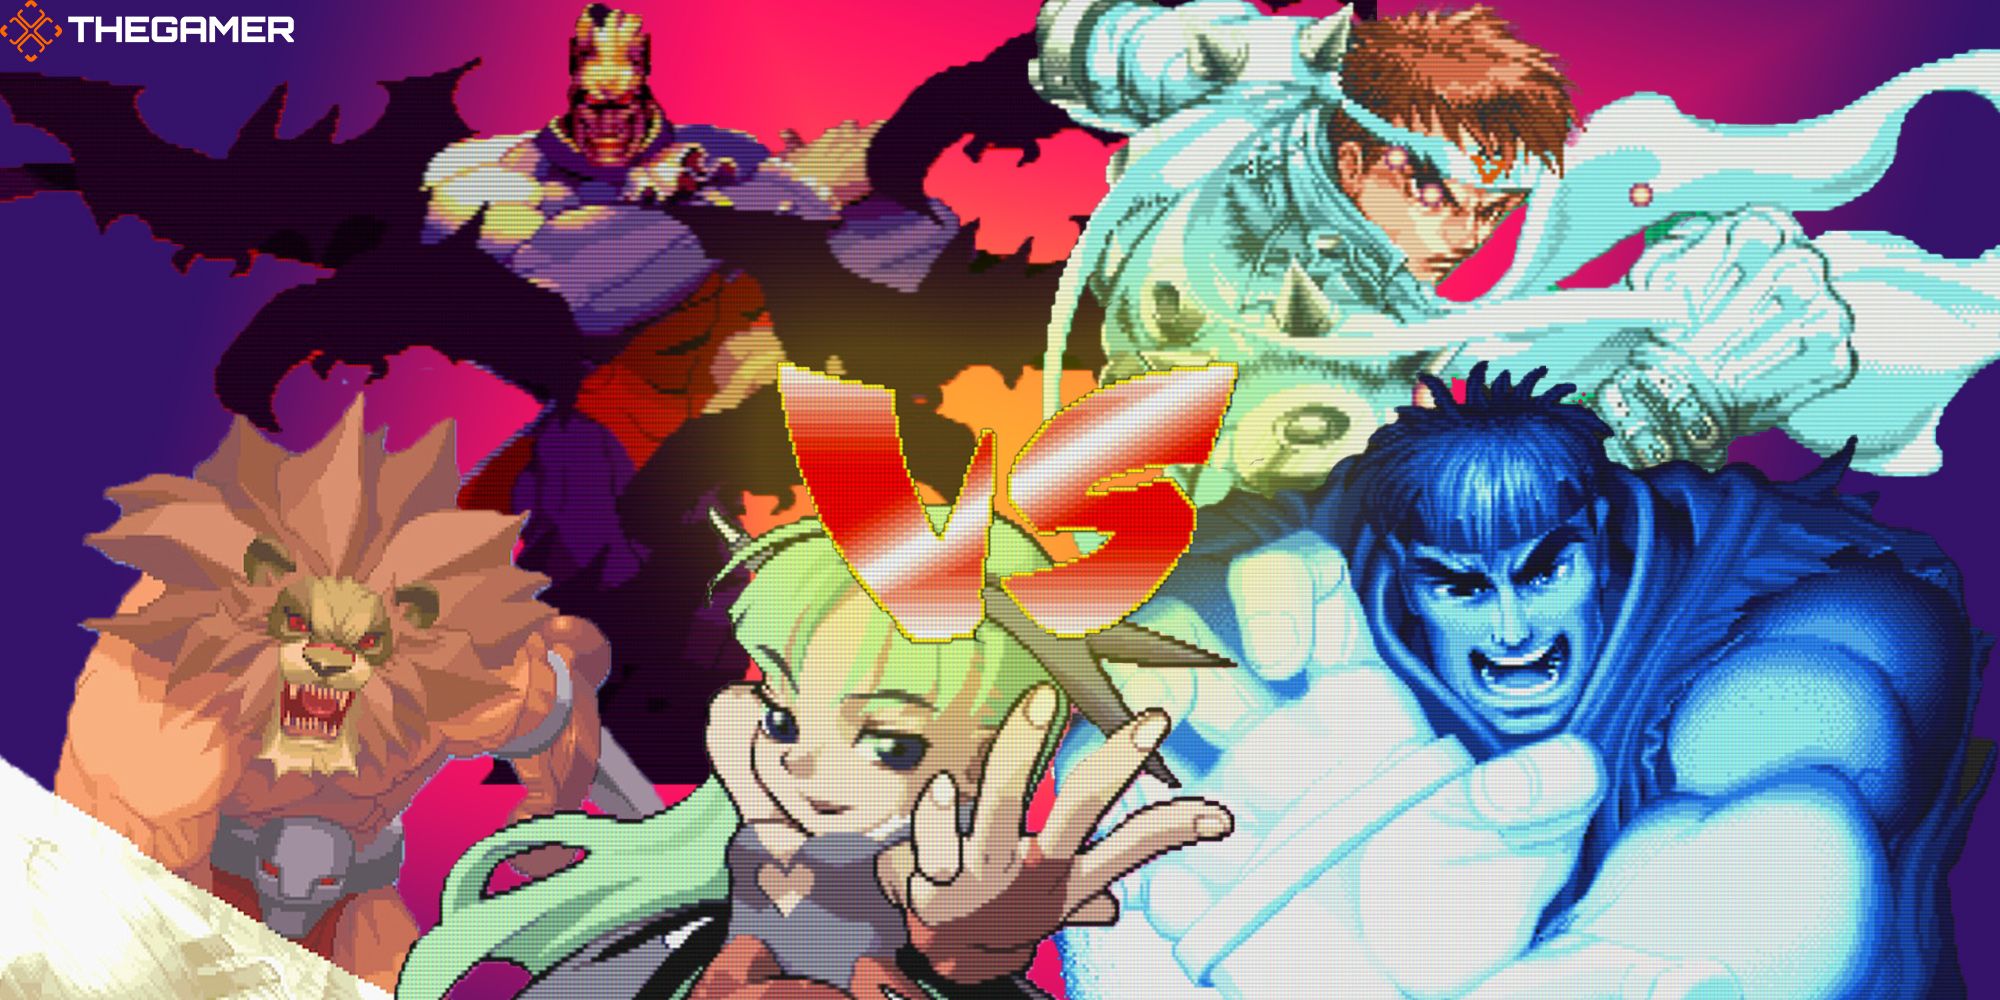 Leo, Demitri, Morrigan, Jin, and Ryu face off in an epic Capcom crossover battle in this feature image for TG.